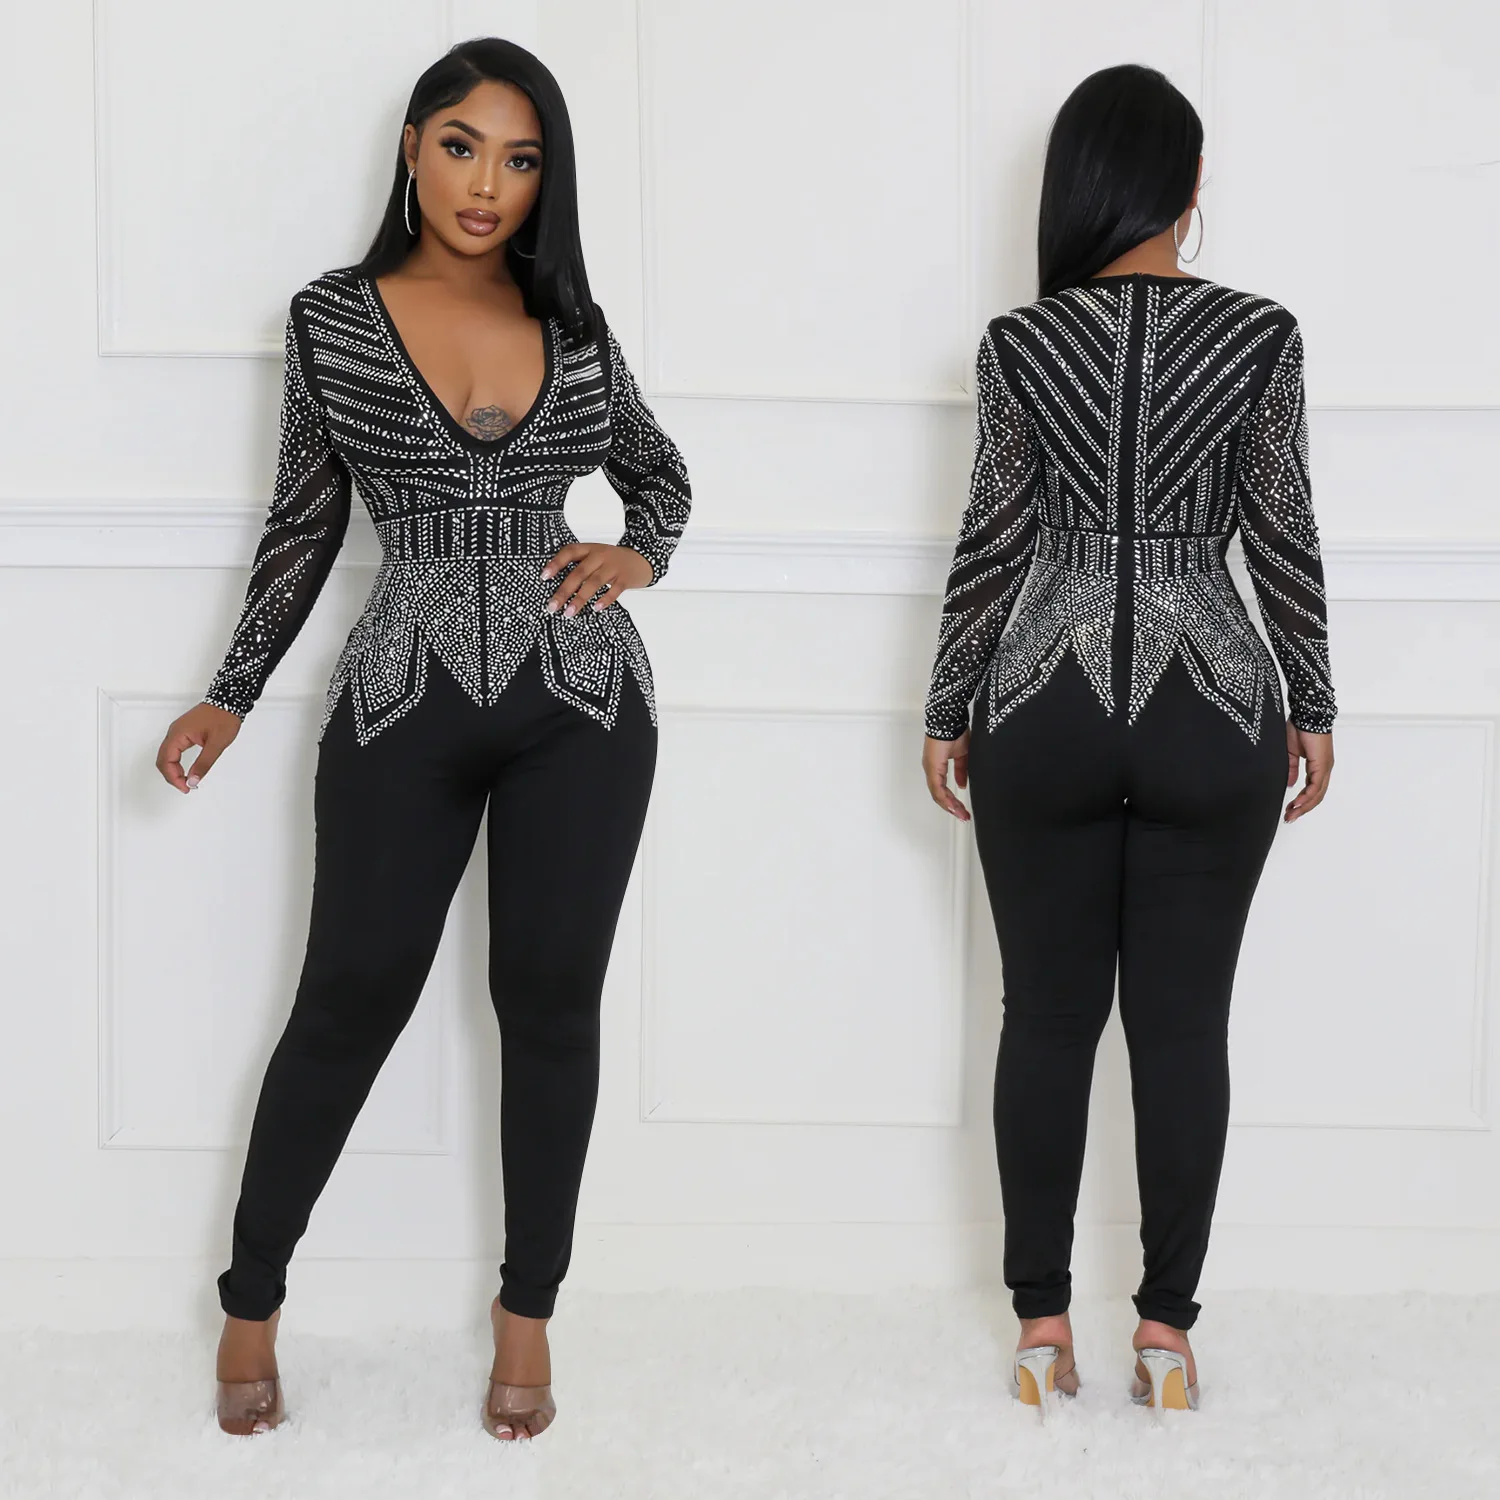 Women's V-Neck Long Sleeved Jumpsuit, Monochromatic Pants, Hot Diamond, European and American Fashion, Amazon Hot Selling cosplay bodysuits long sleeve zippered tight jumpsuit women ropa de mujer fashion printed bodysuit playsuit womens clothing new